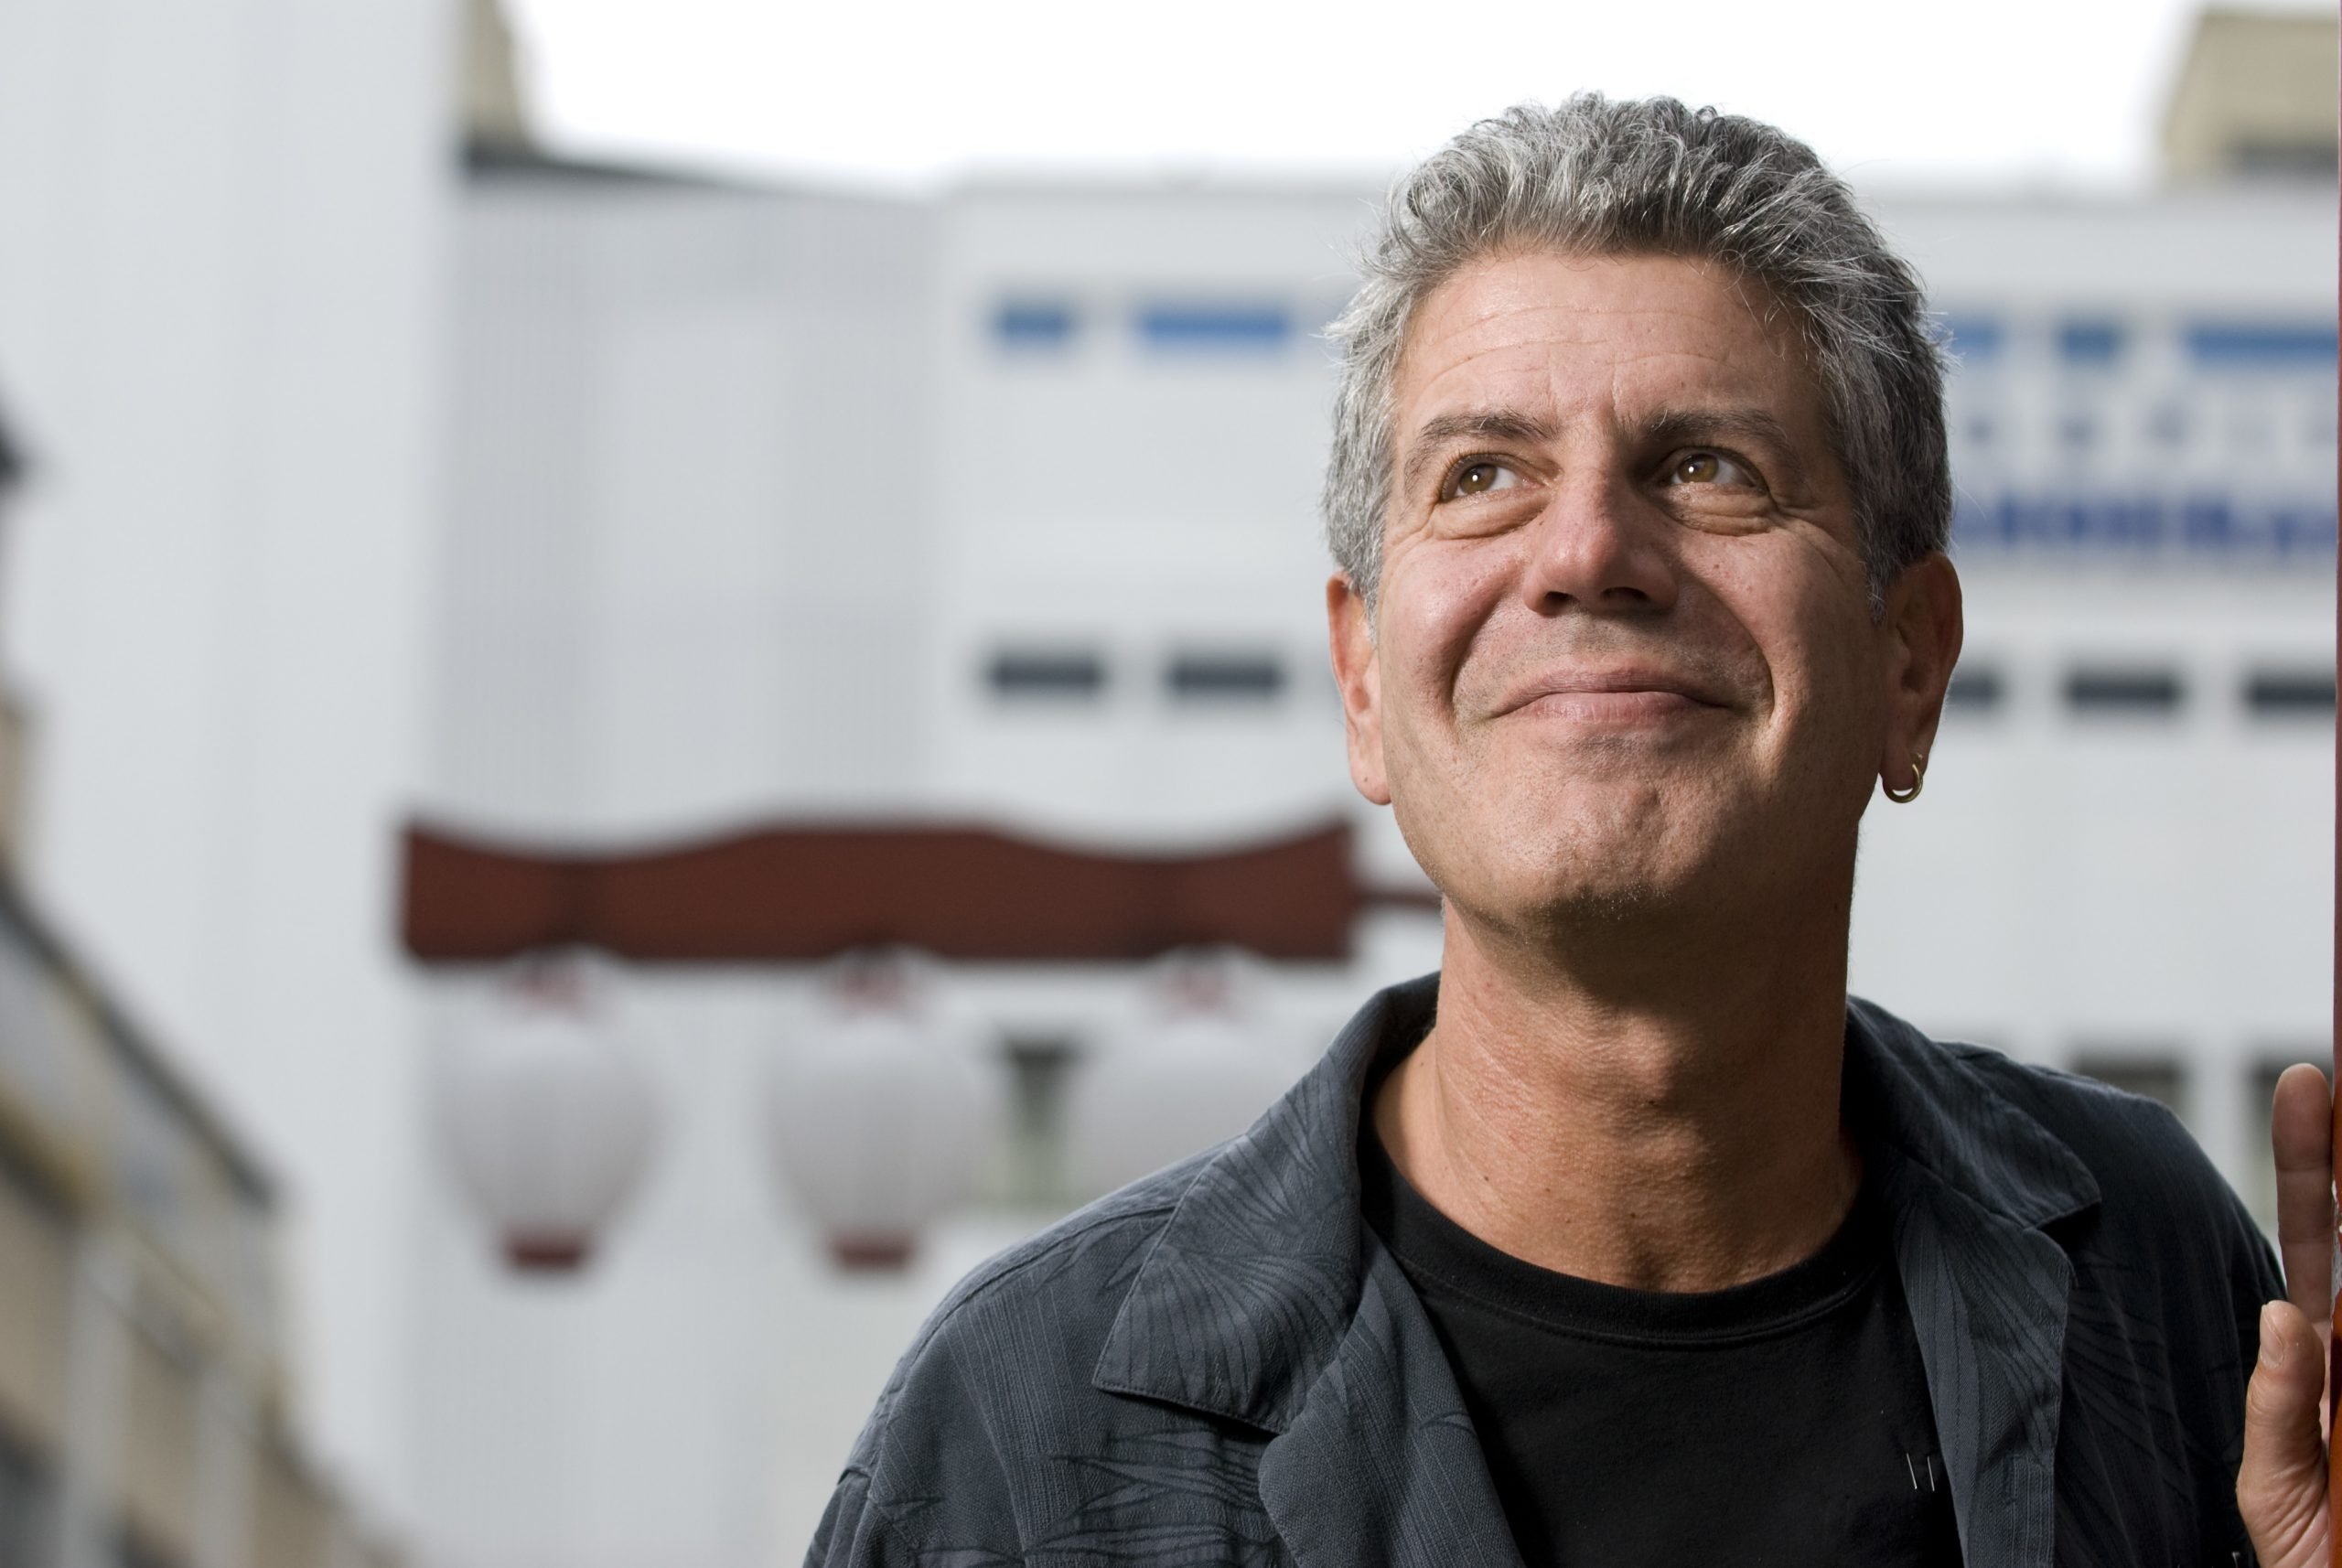 Chef and television personality Anthony Bourdain